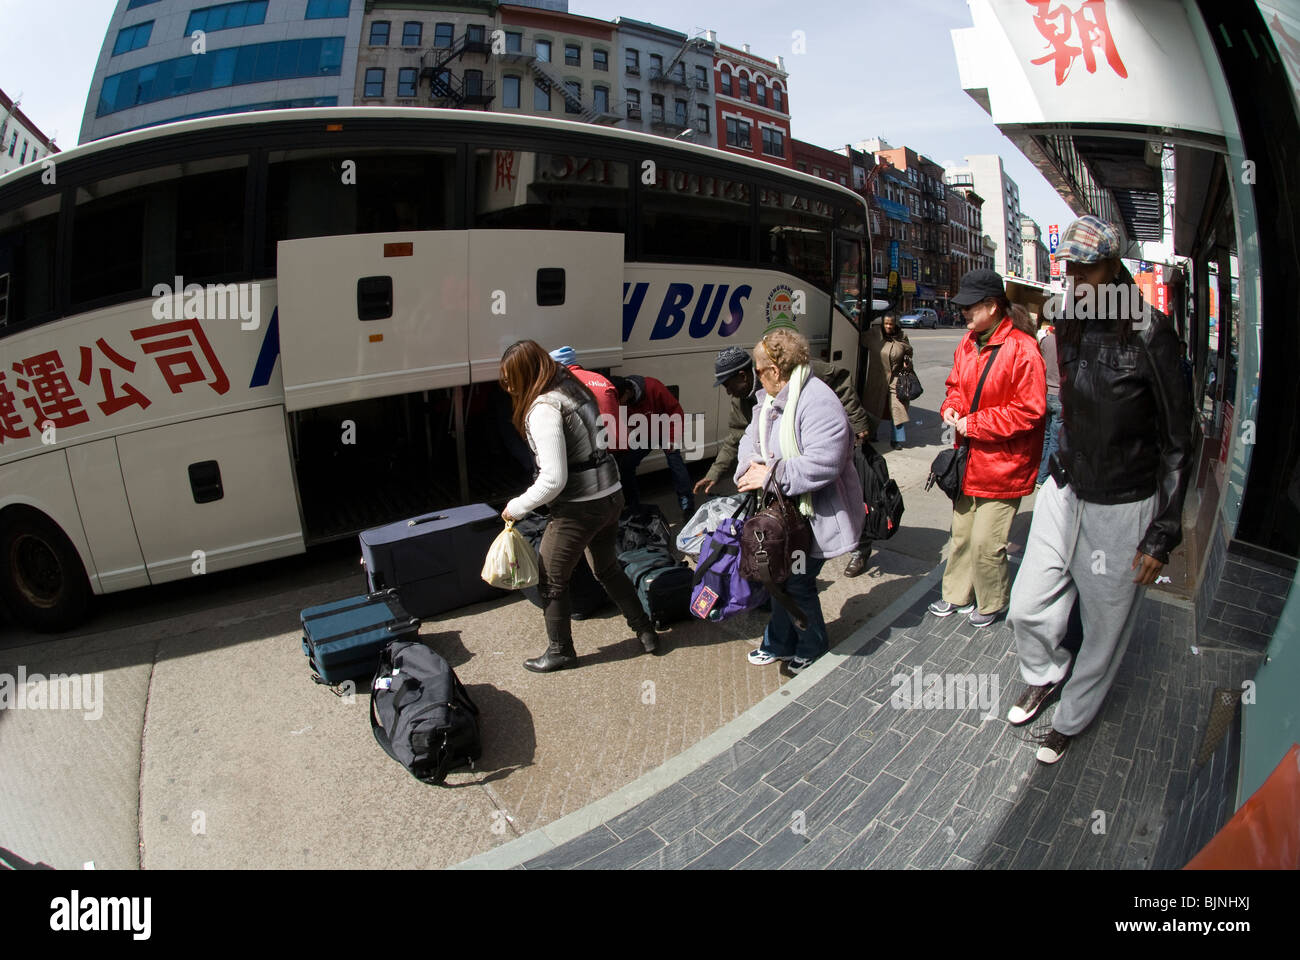 Travelers arrive after traveling on one of the low cost bus services in New York in Chinatown on East Broadway Stock Photo